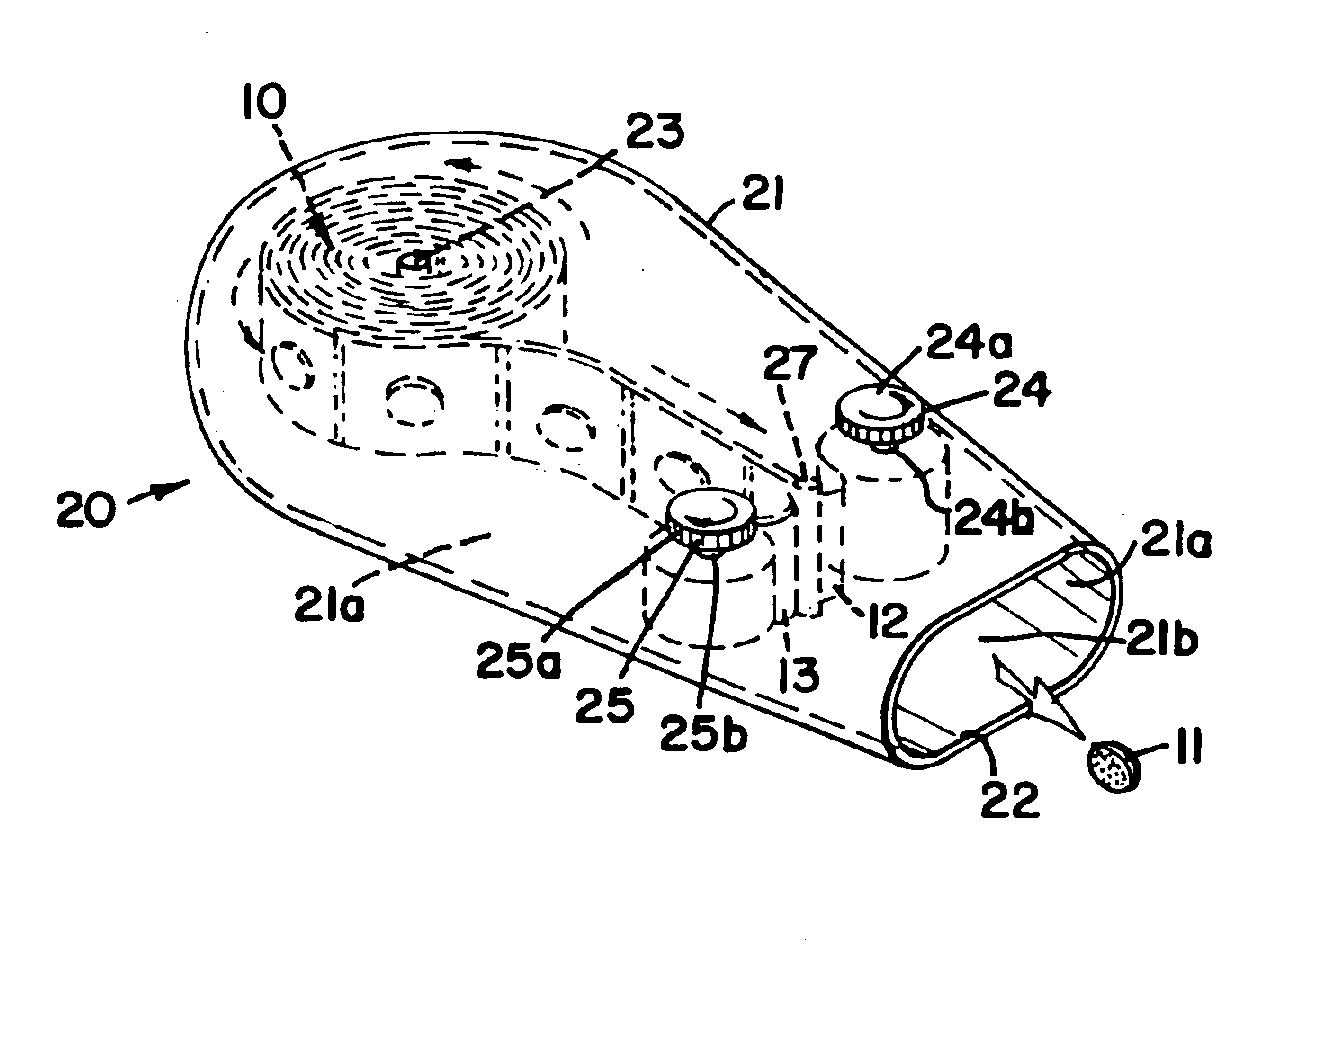 Method and apparatus for using a unit dose dispenser